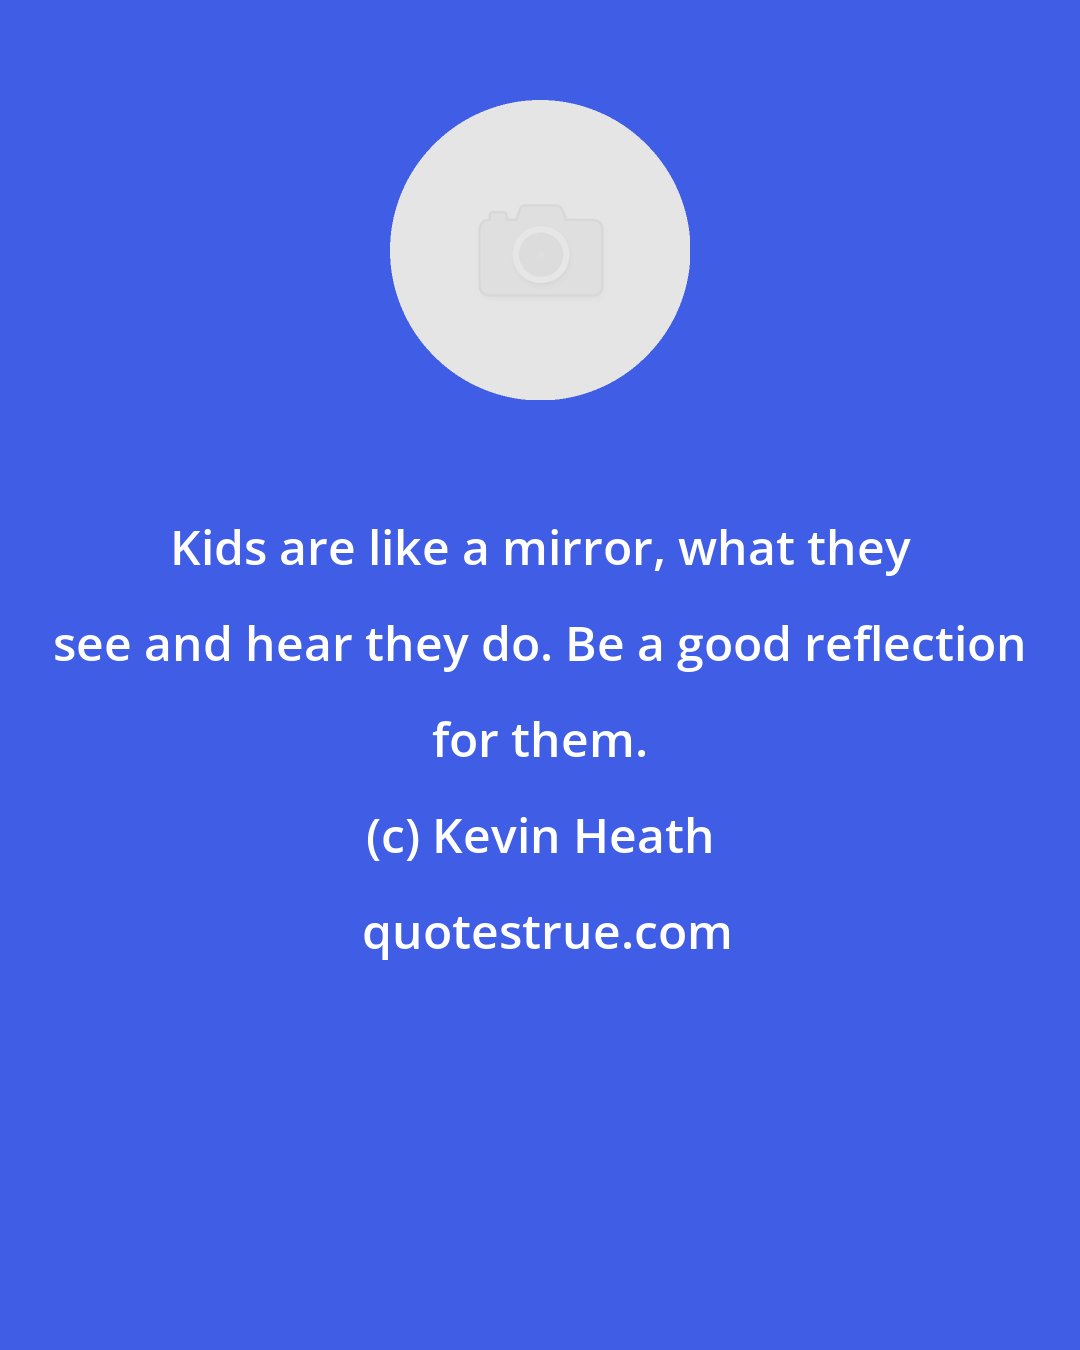 Kevin Heath: Kids are like a mirror, what they see and hear they do. Be a good reflection for them.